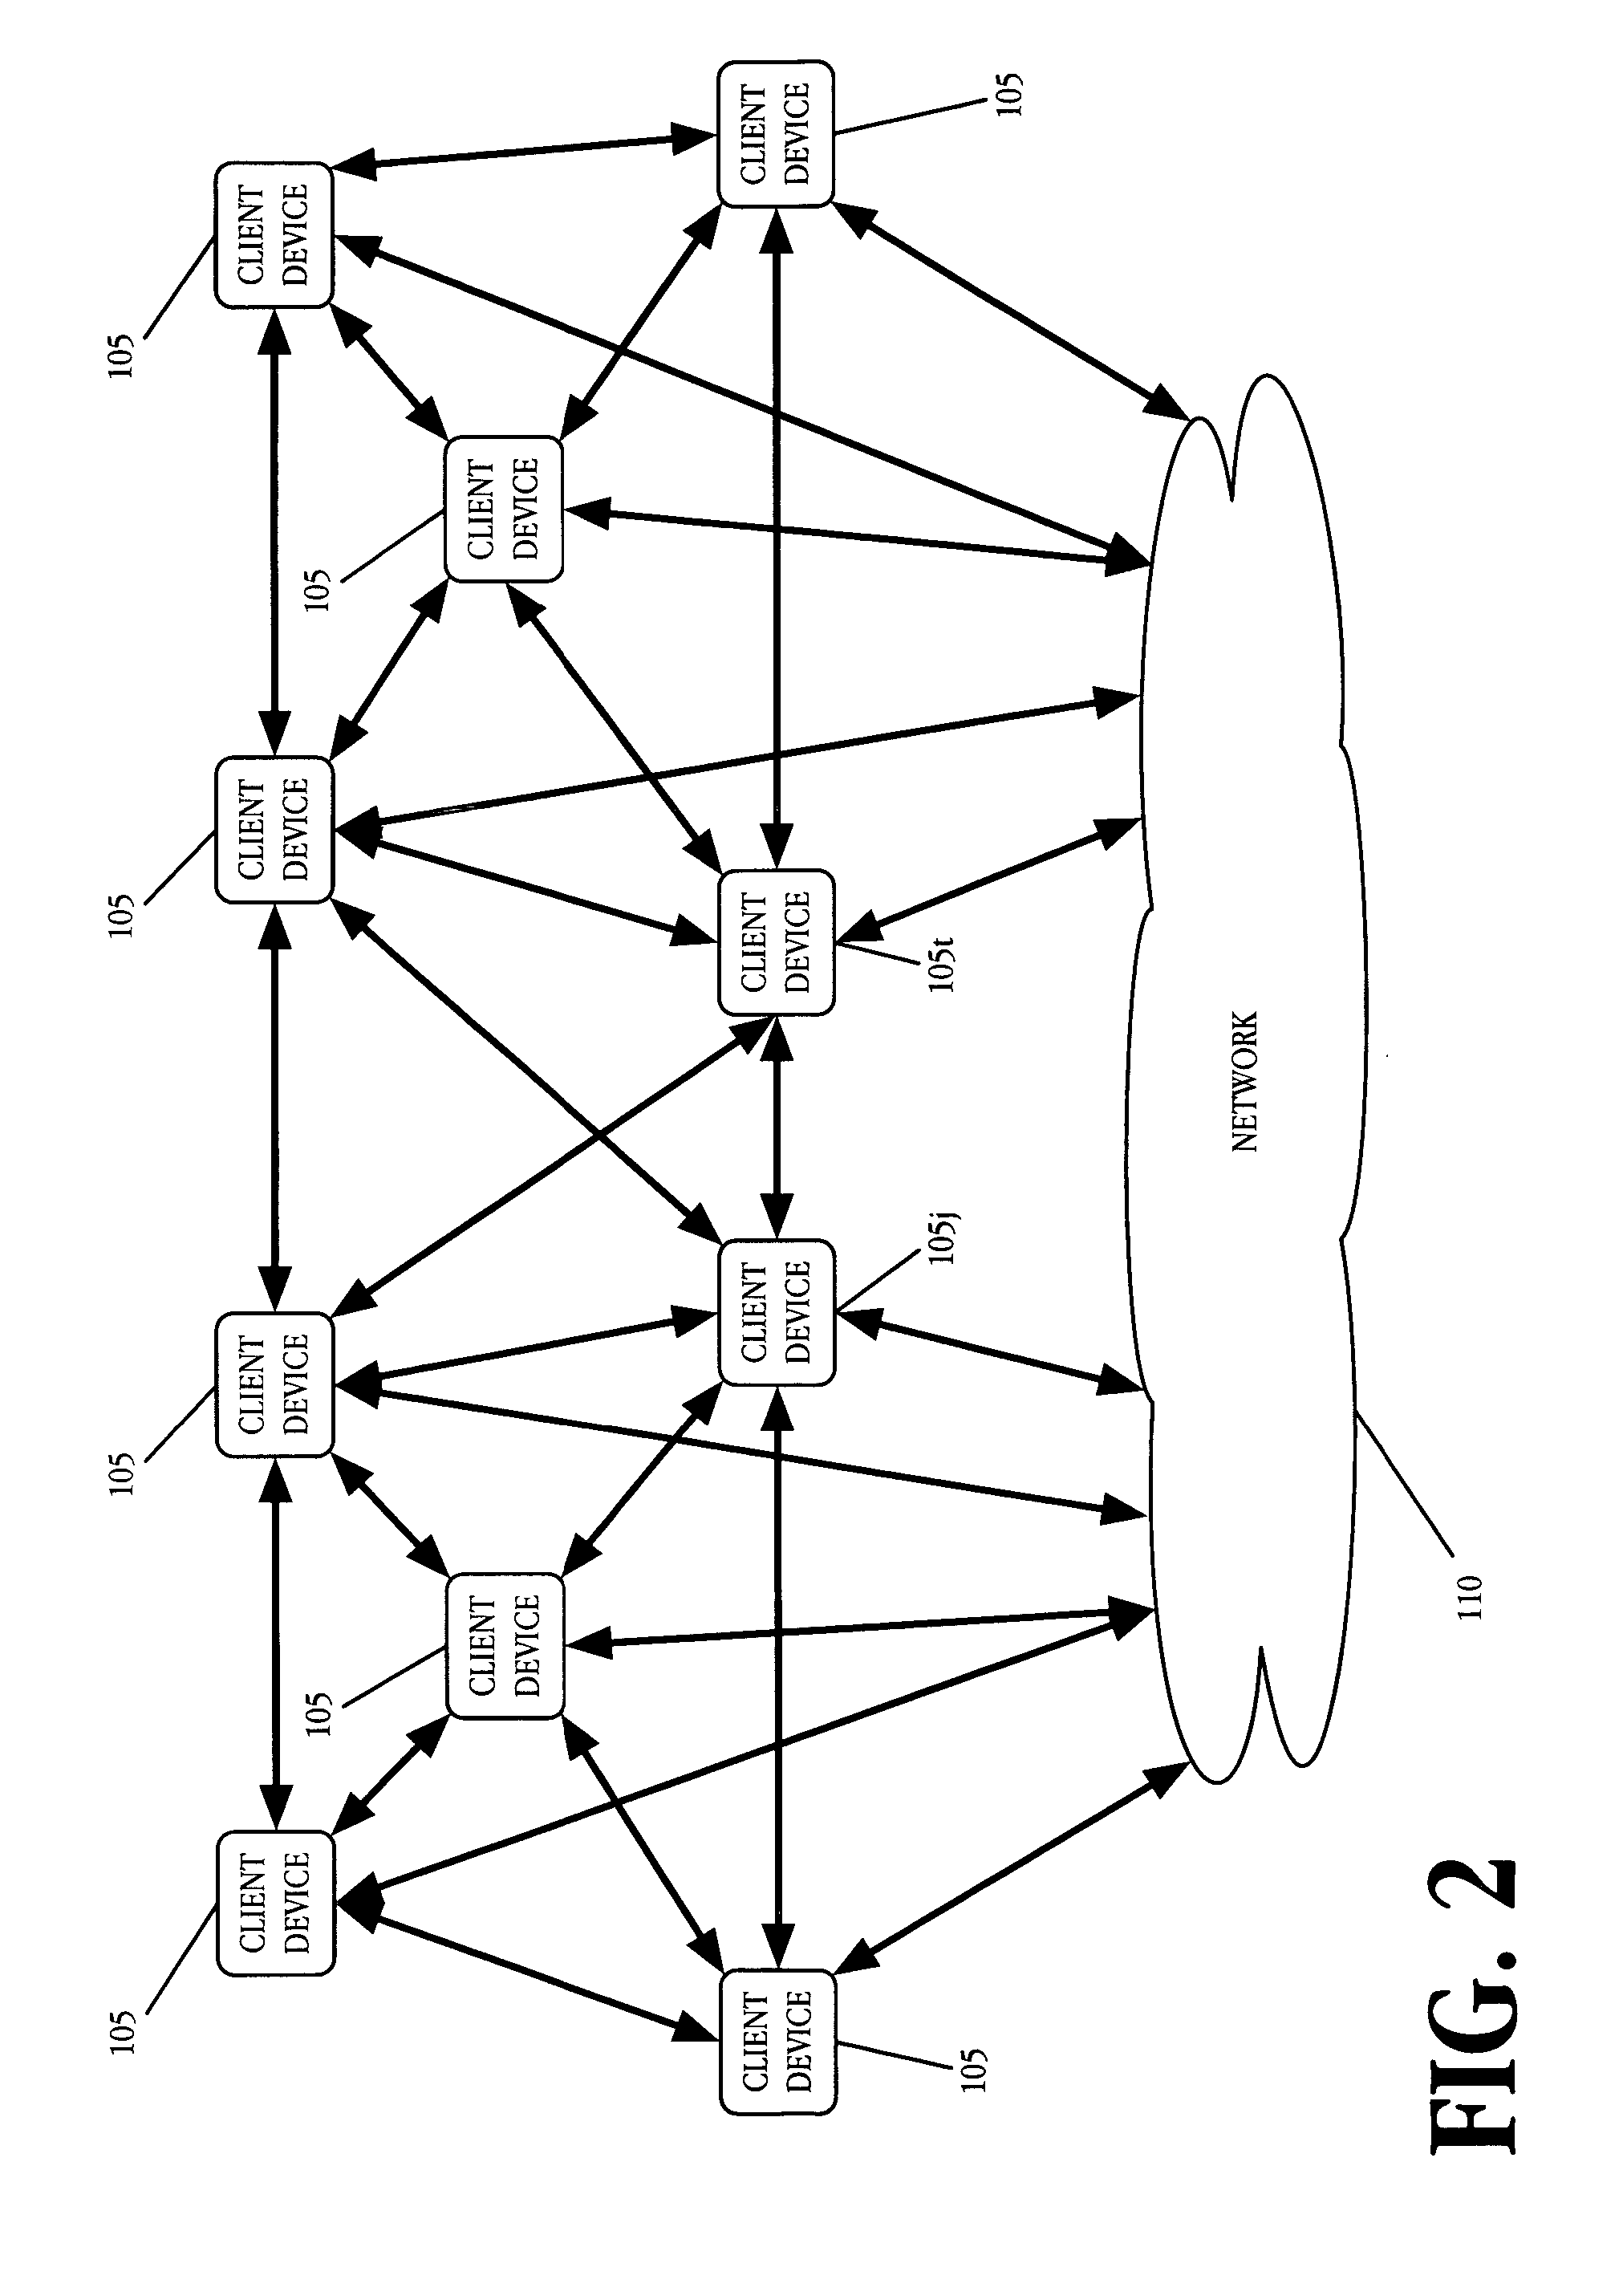 Systems and methods for virtualizing functions and decentralizing service delivery in a flat network of interconnected personal devices